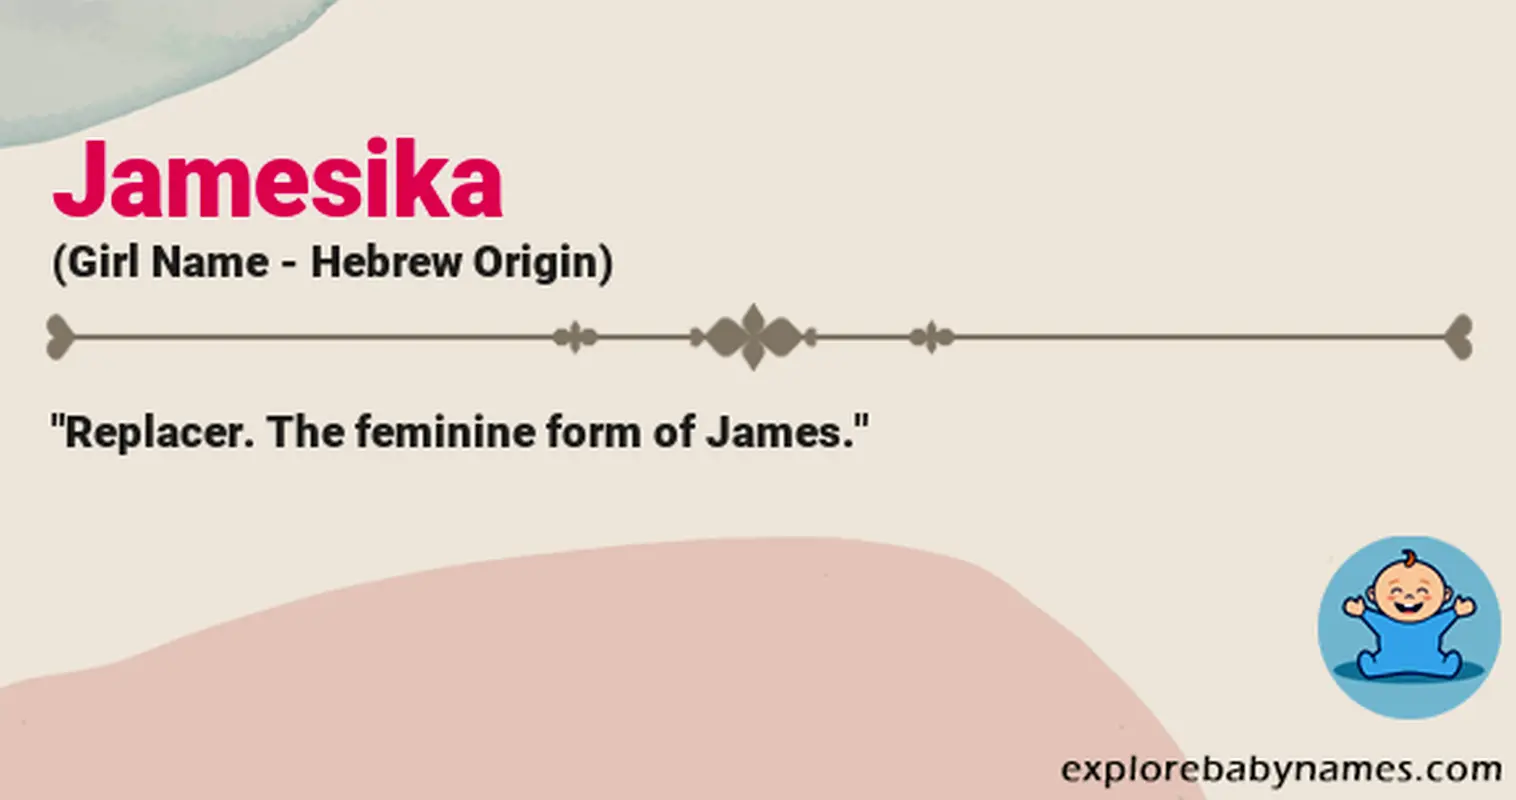 Meaning of Jamesika